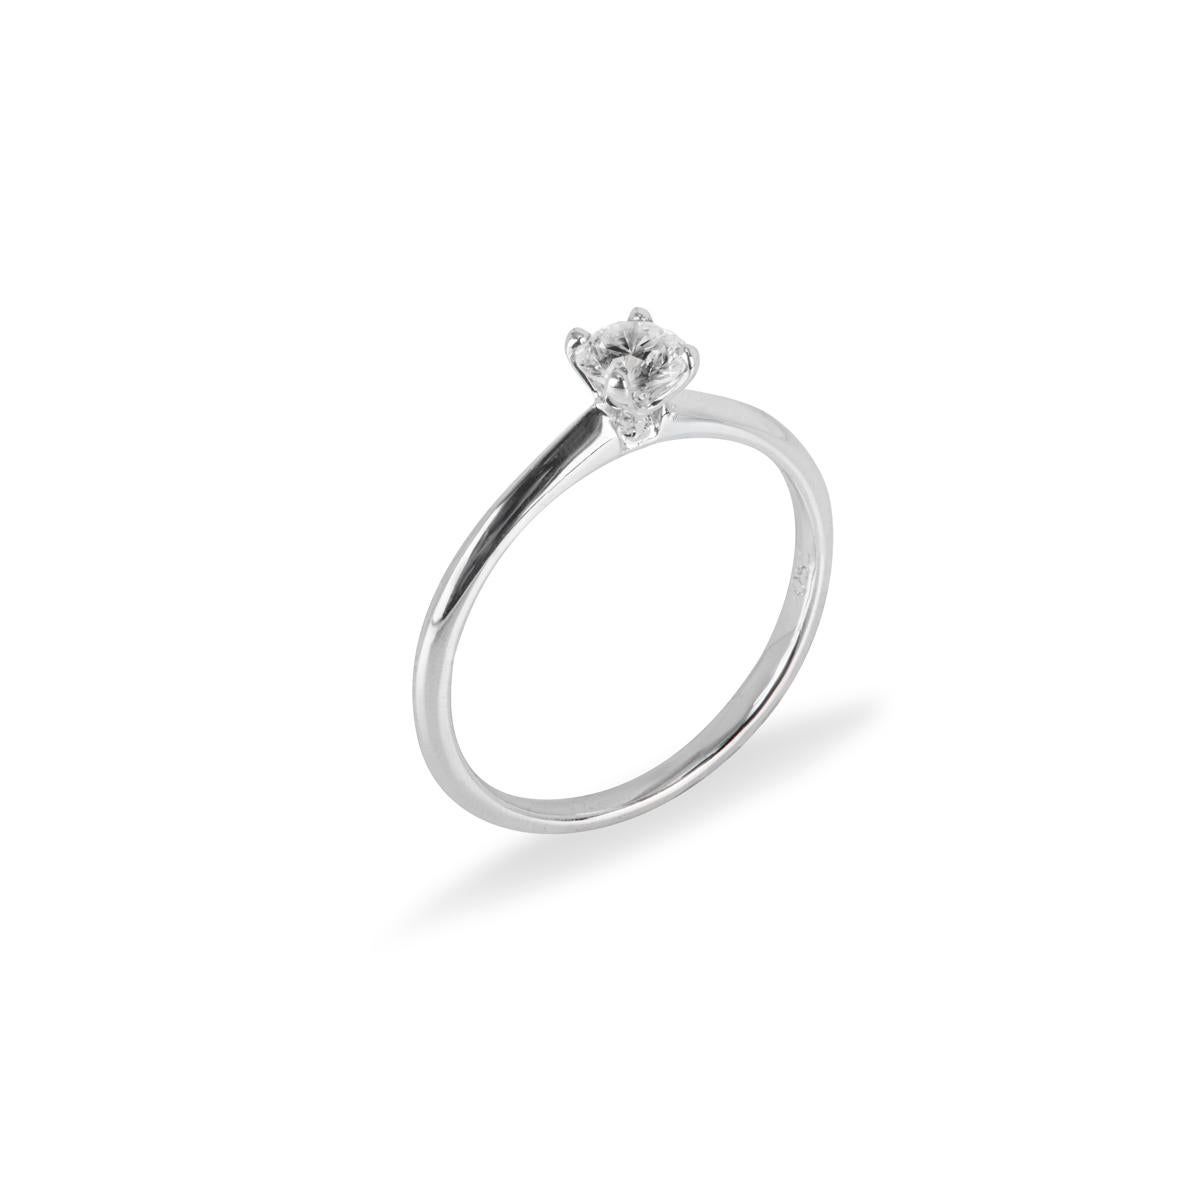 A classic 18k white gold diamond solitaire engagement ring. The solitaire features a round brilliant cut diamond in a four claw mount weighing 0.36ct, H colour and SI clarity. The ring is currently a size UK M½ - EU 52½ but can be adjusted for the